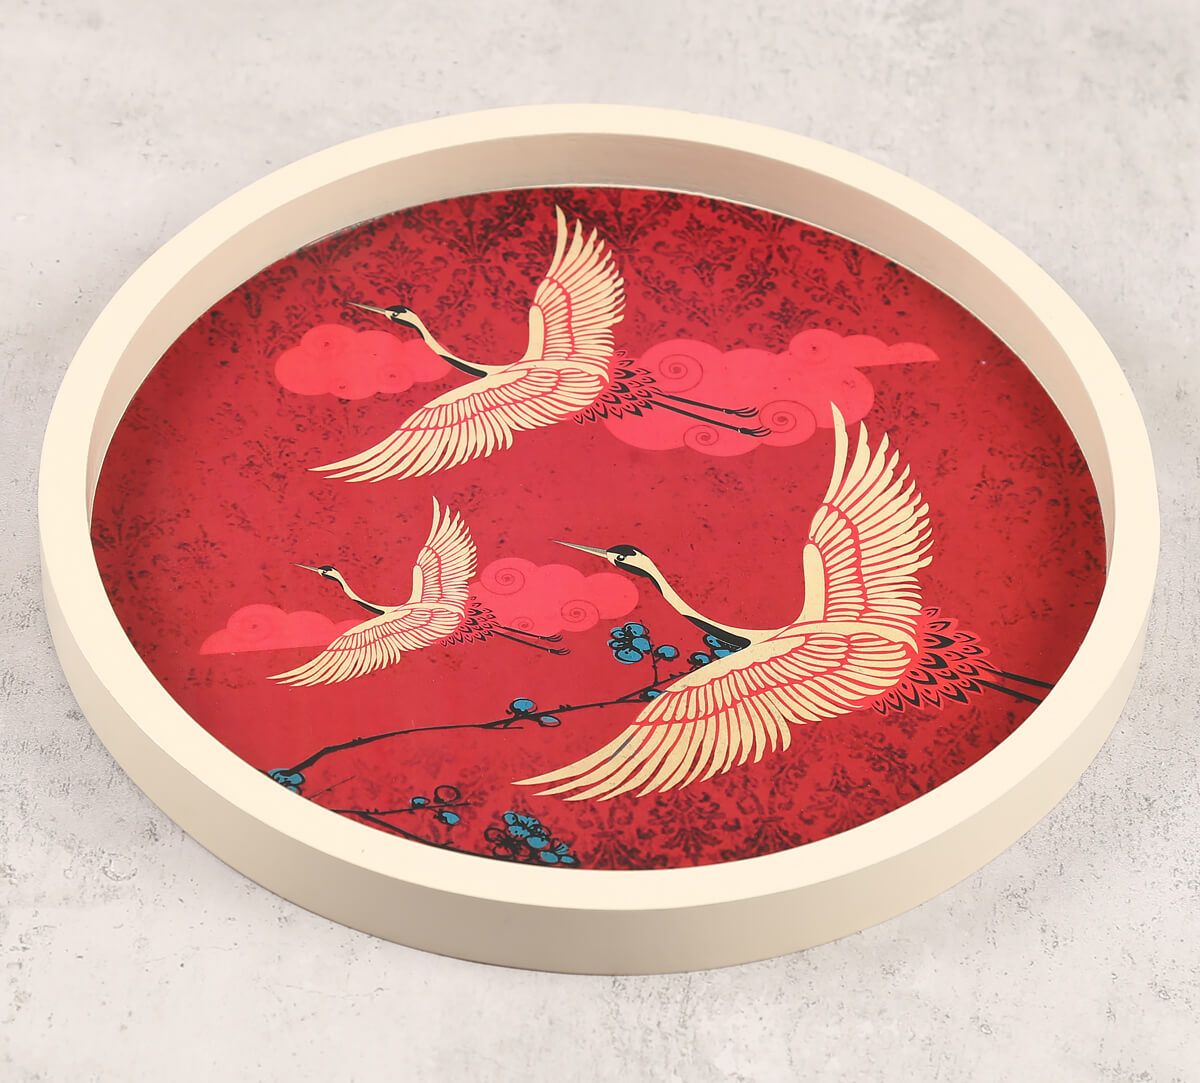 India Circus by Krsnaa Mehta Legend of the Cranes Decor Plate